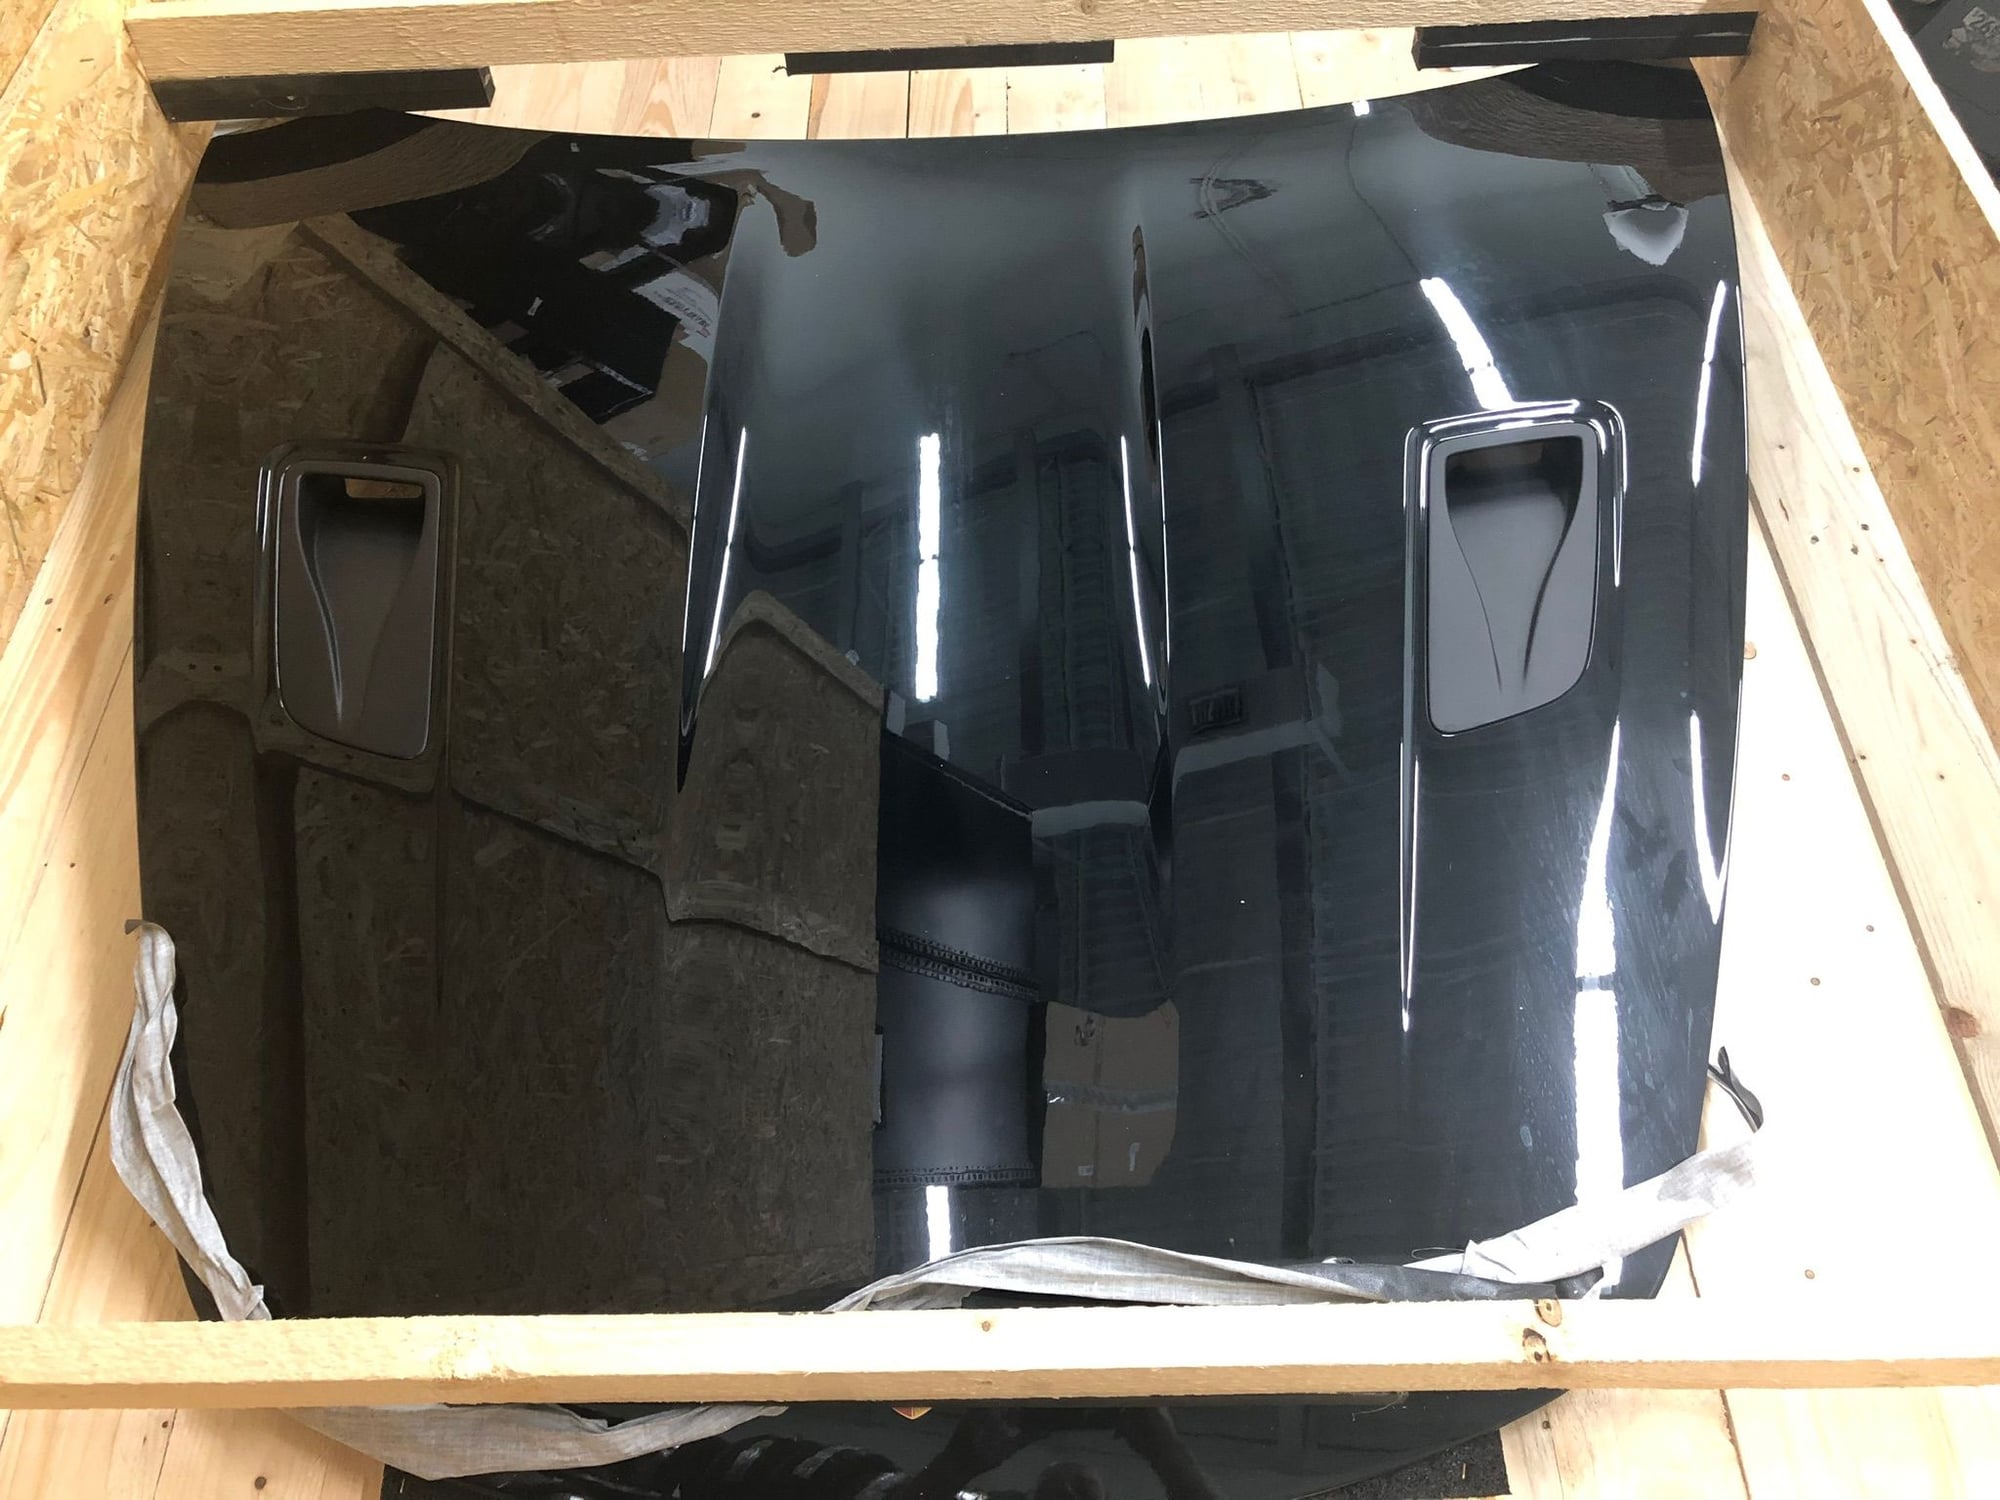 Exterior Body Parts - Brand new 991.2 Carbon GT3RS hood - New - 2018 to 2019 Porsche GT3 - Miami, FL 33127, United States